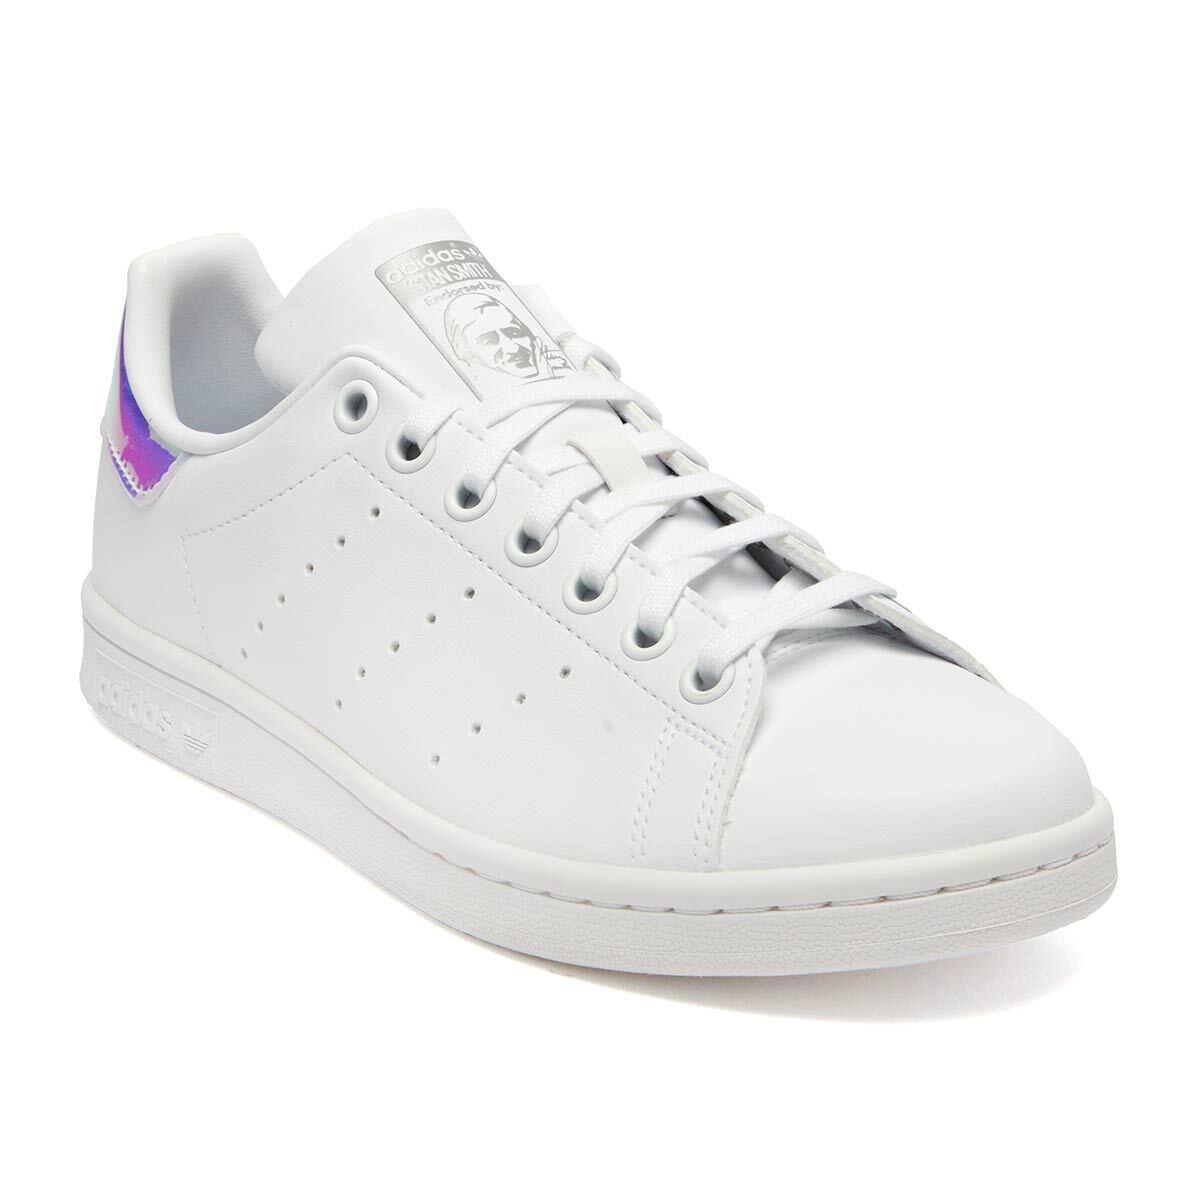 Adidas Youth Stan Smith J Shoes